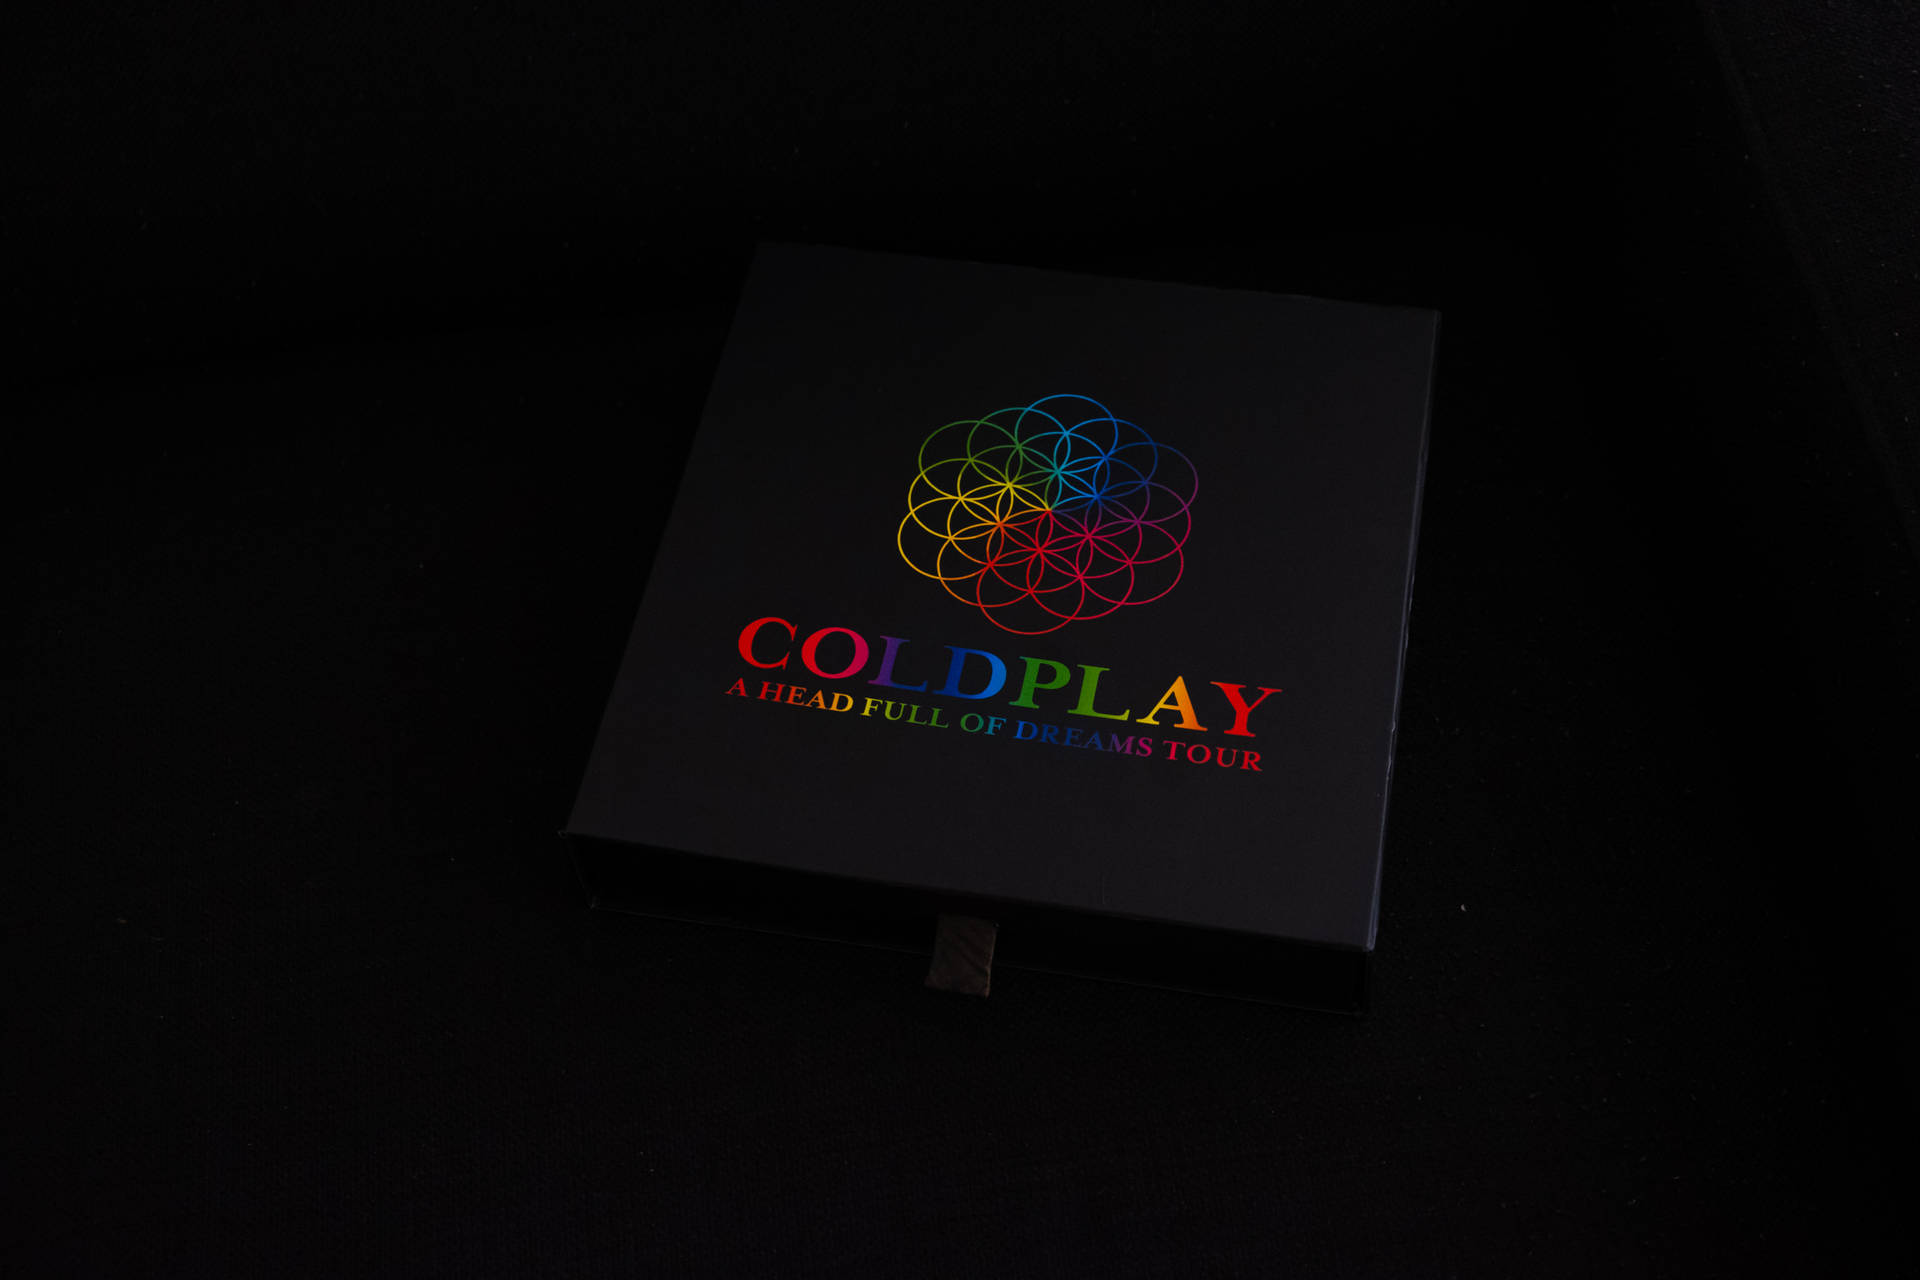 Top 999+ Coldplay Wallpapers Full HD, 4K✅Free to Use